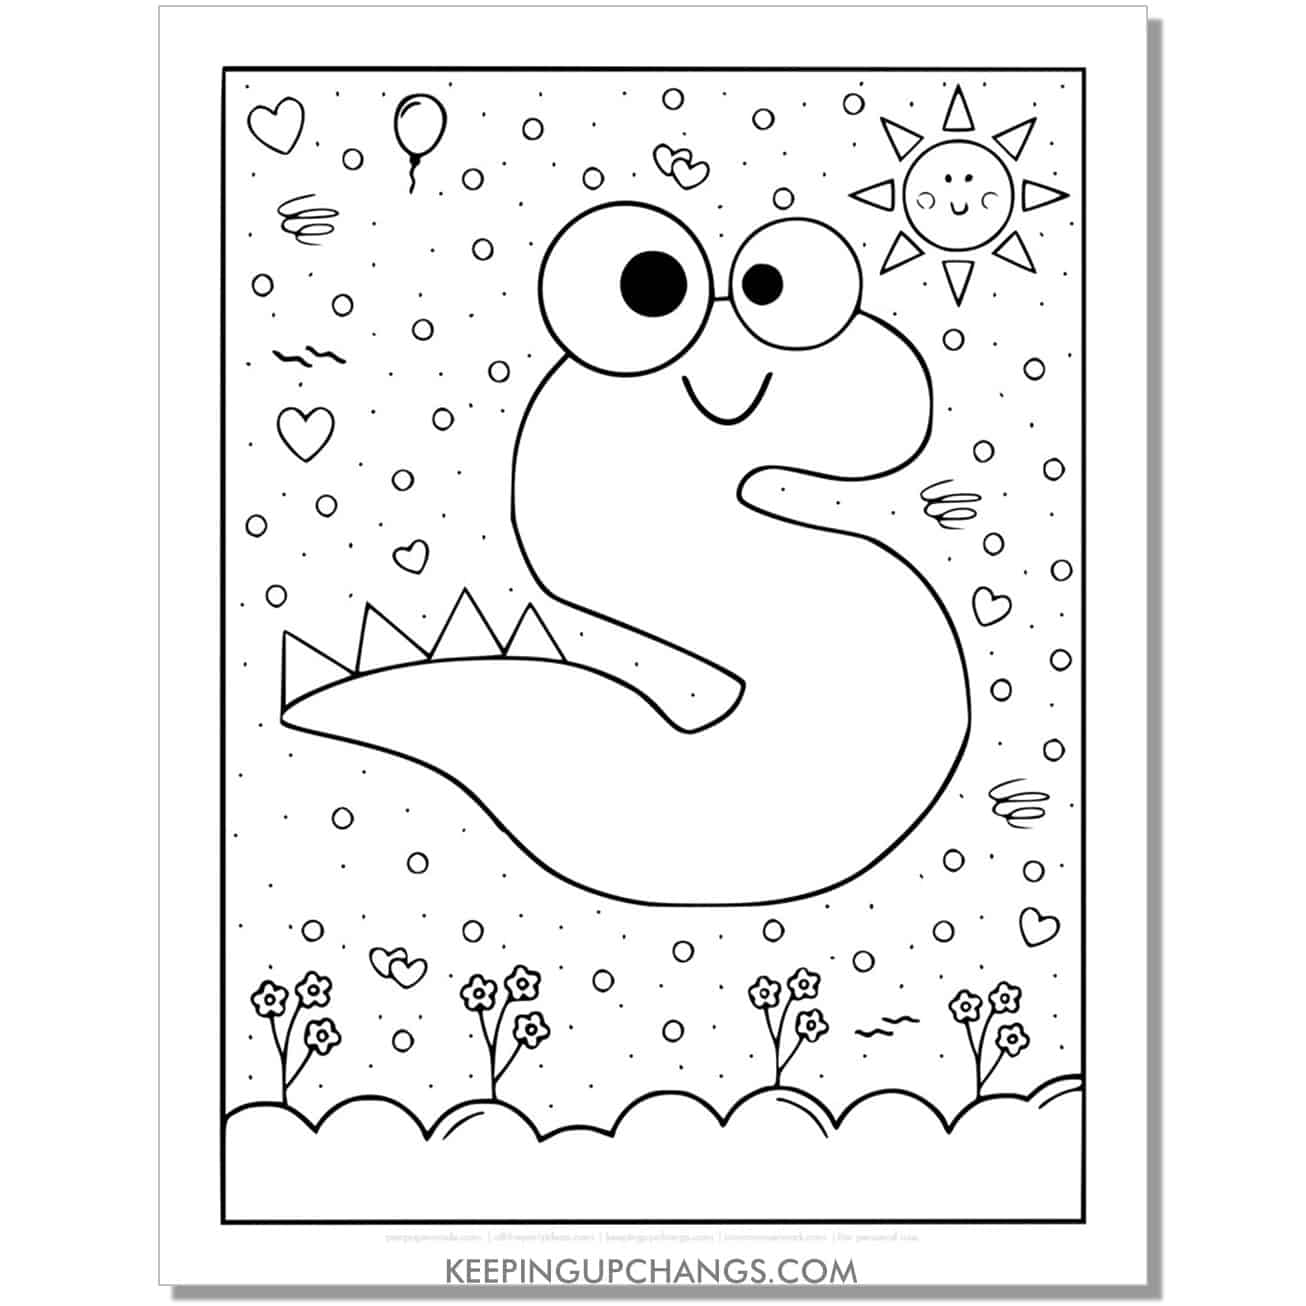 cute s coloring page with monster dinosaur letter.